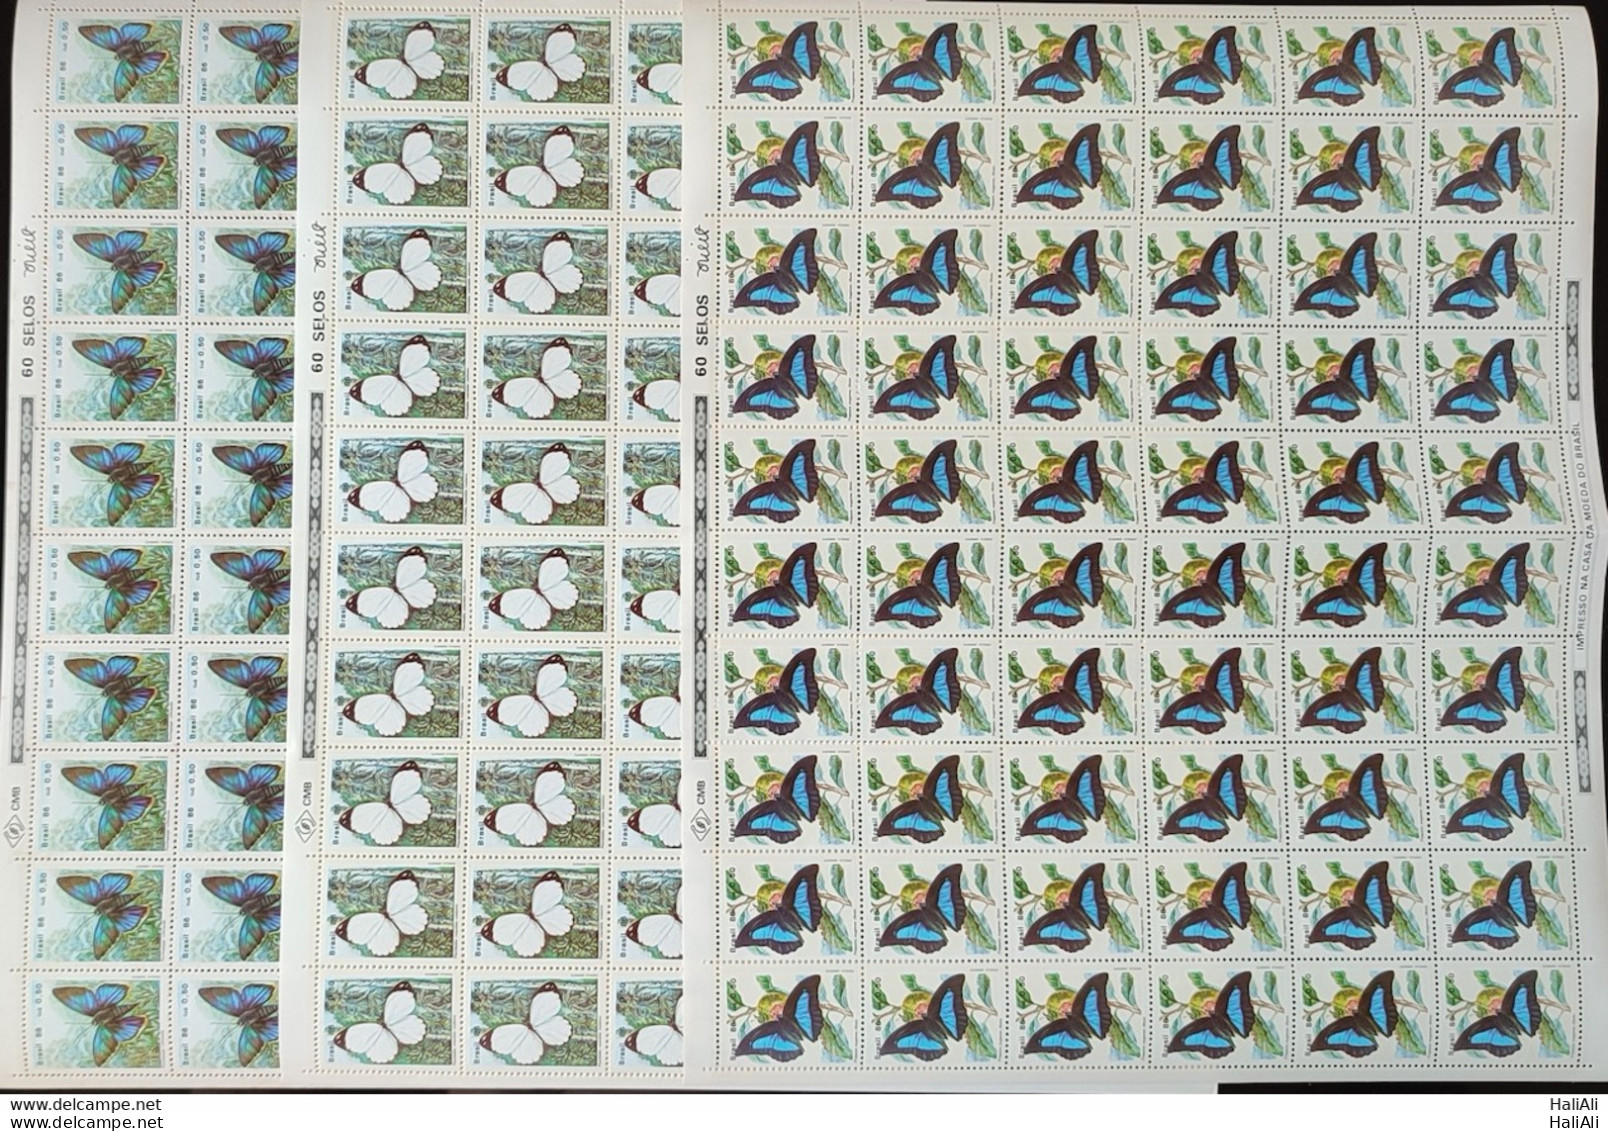 C 1512 Brazil Stamp Butterfly Insects 1986 Sheet Complete Series.jpg - Unused Stamps